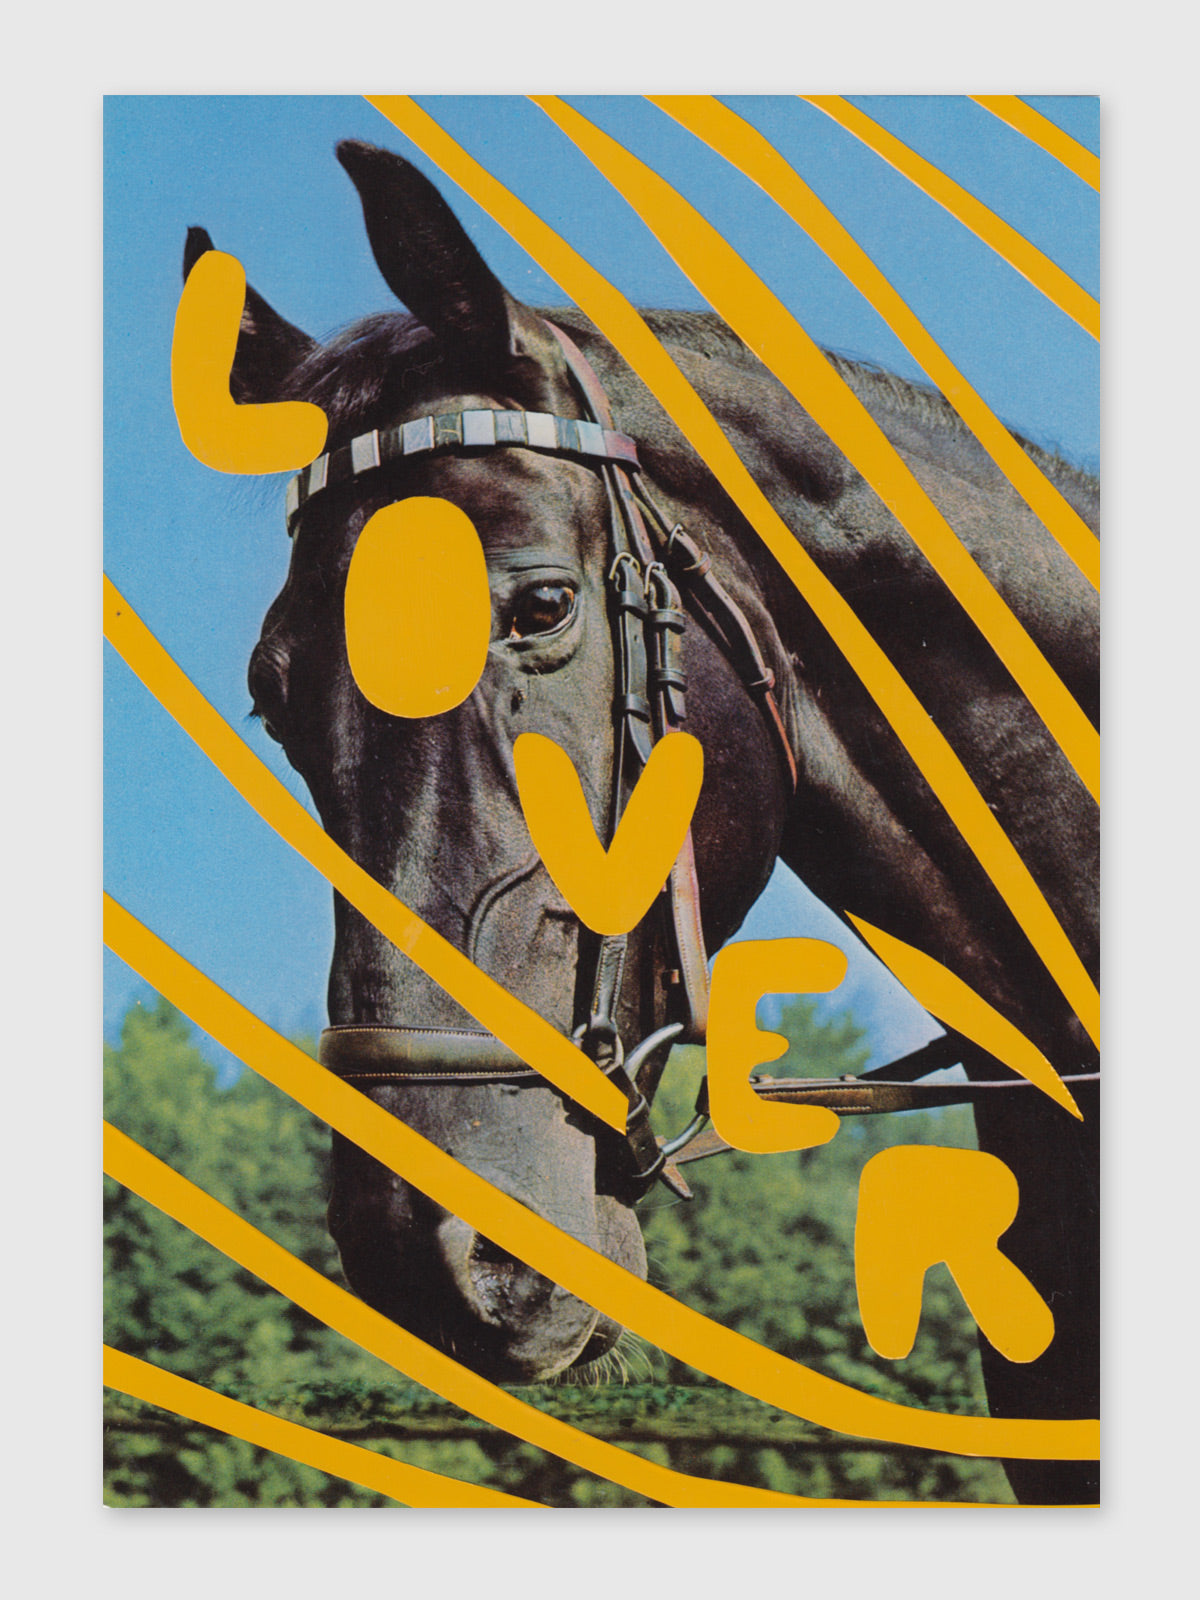 Collage – "Lover"